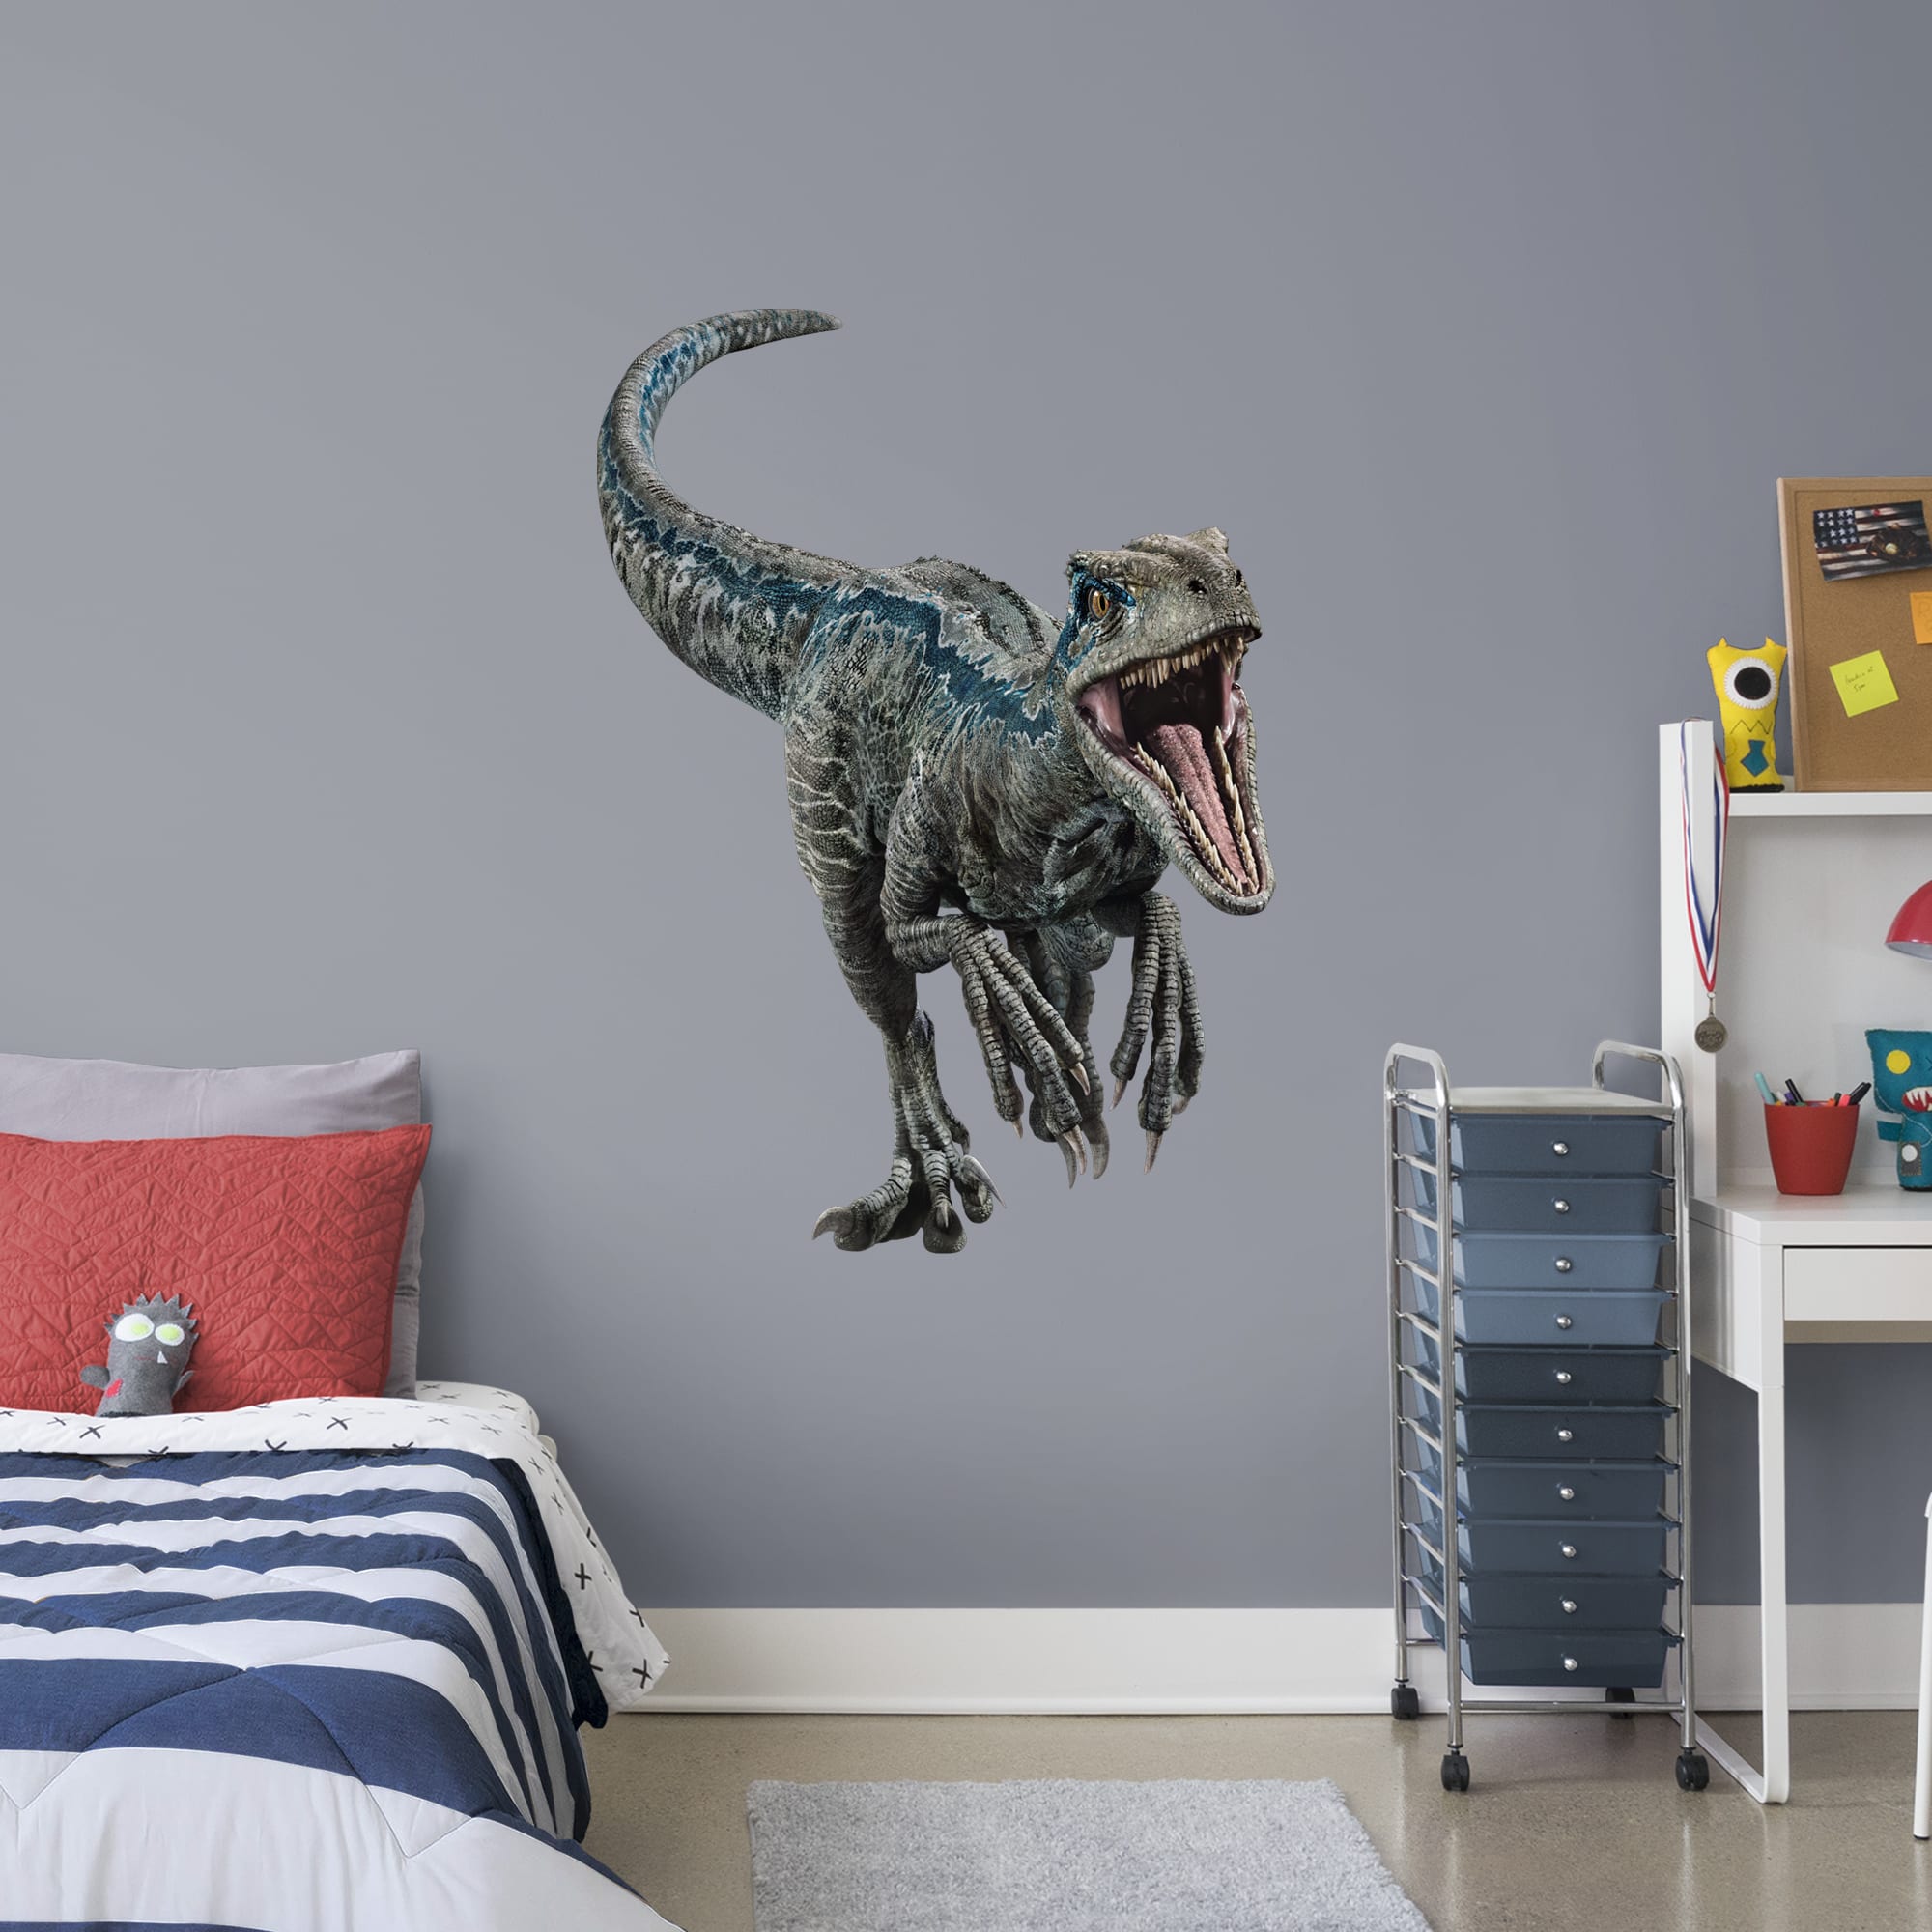 Velociraptor "Blue" - Jurassic World: Fallen Kingdom - Officially Licensed Removable Wall Decal Giant Character + 2 Decals (35"W